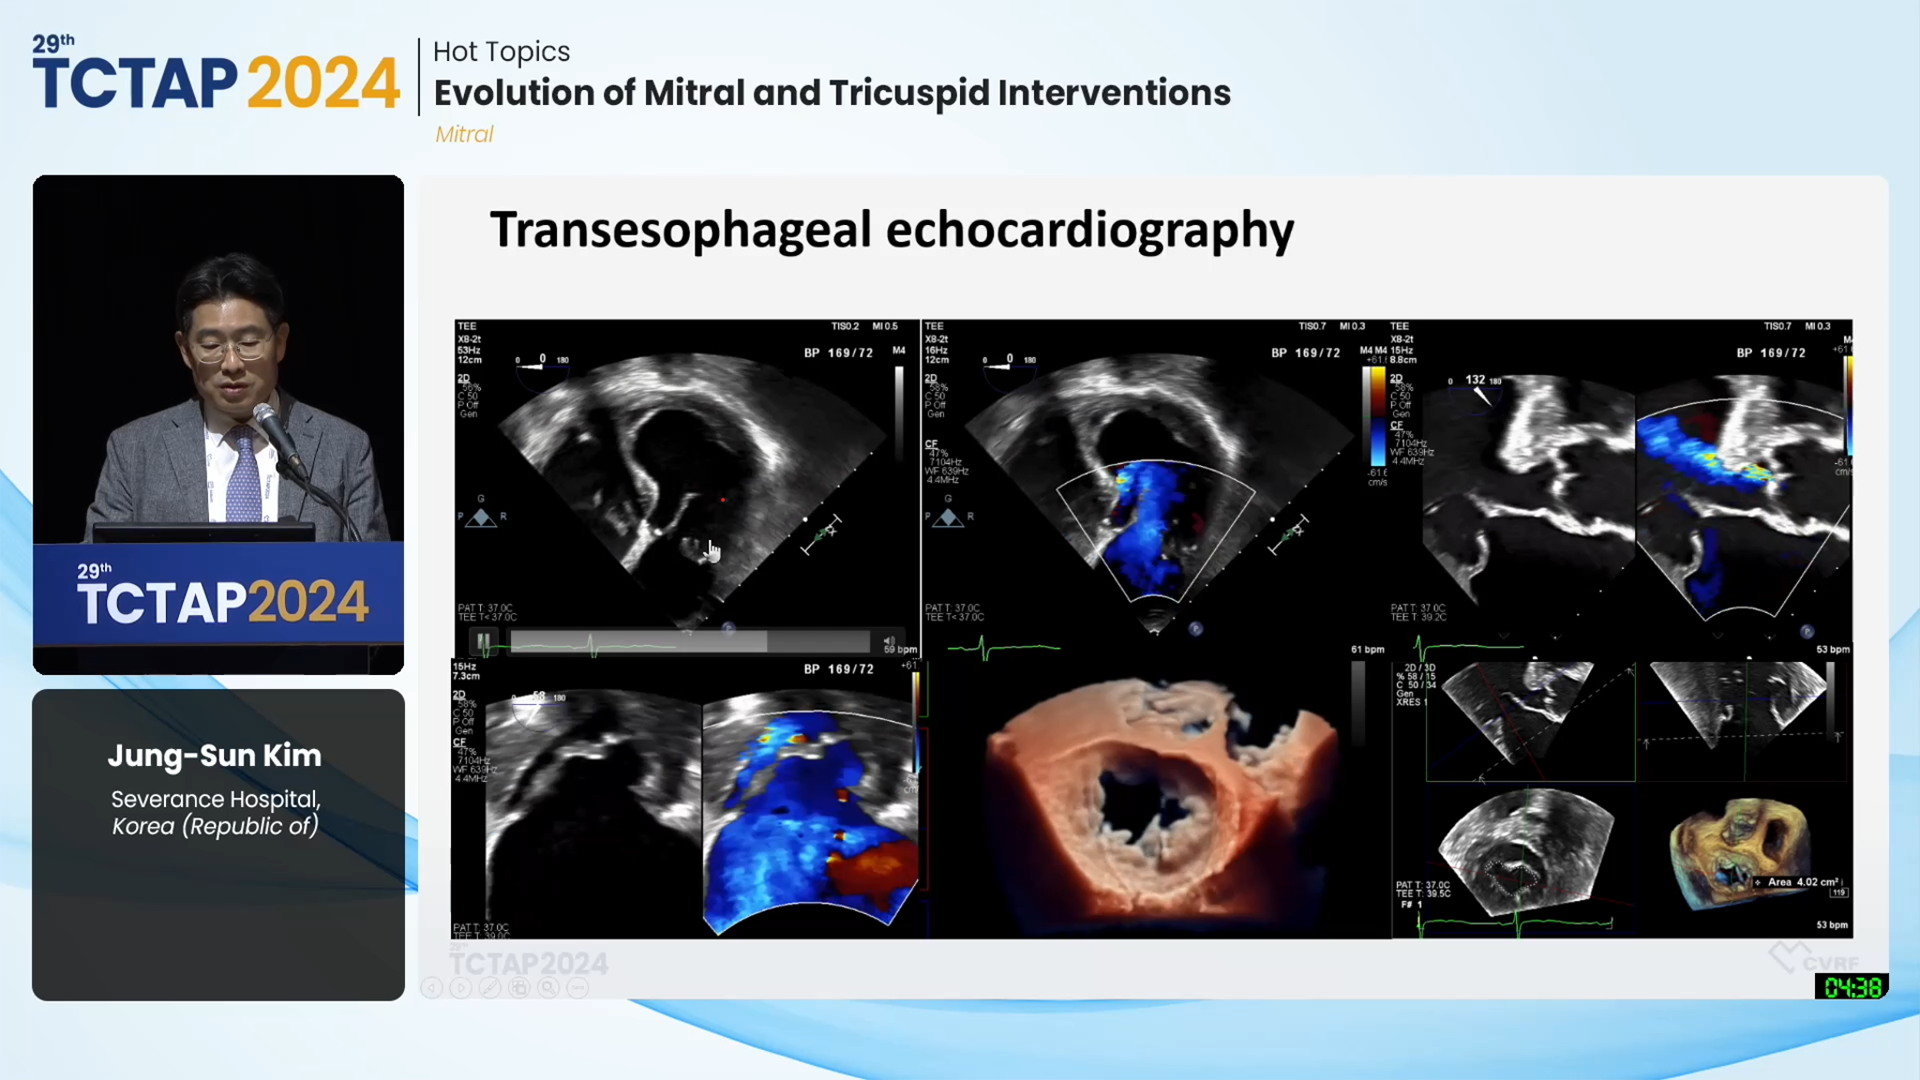 [Hot Topics] Evolution of Mitral and Tricuspid Interventions